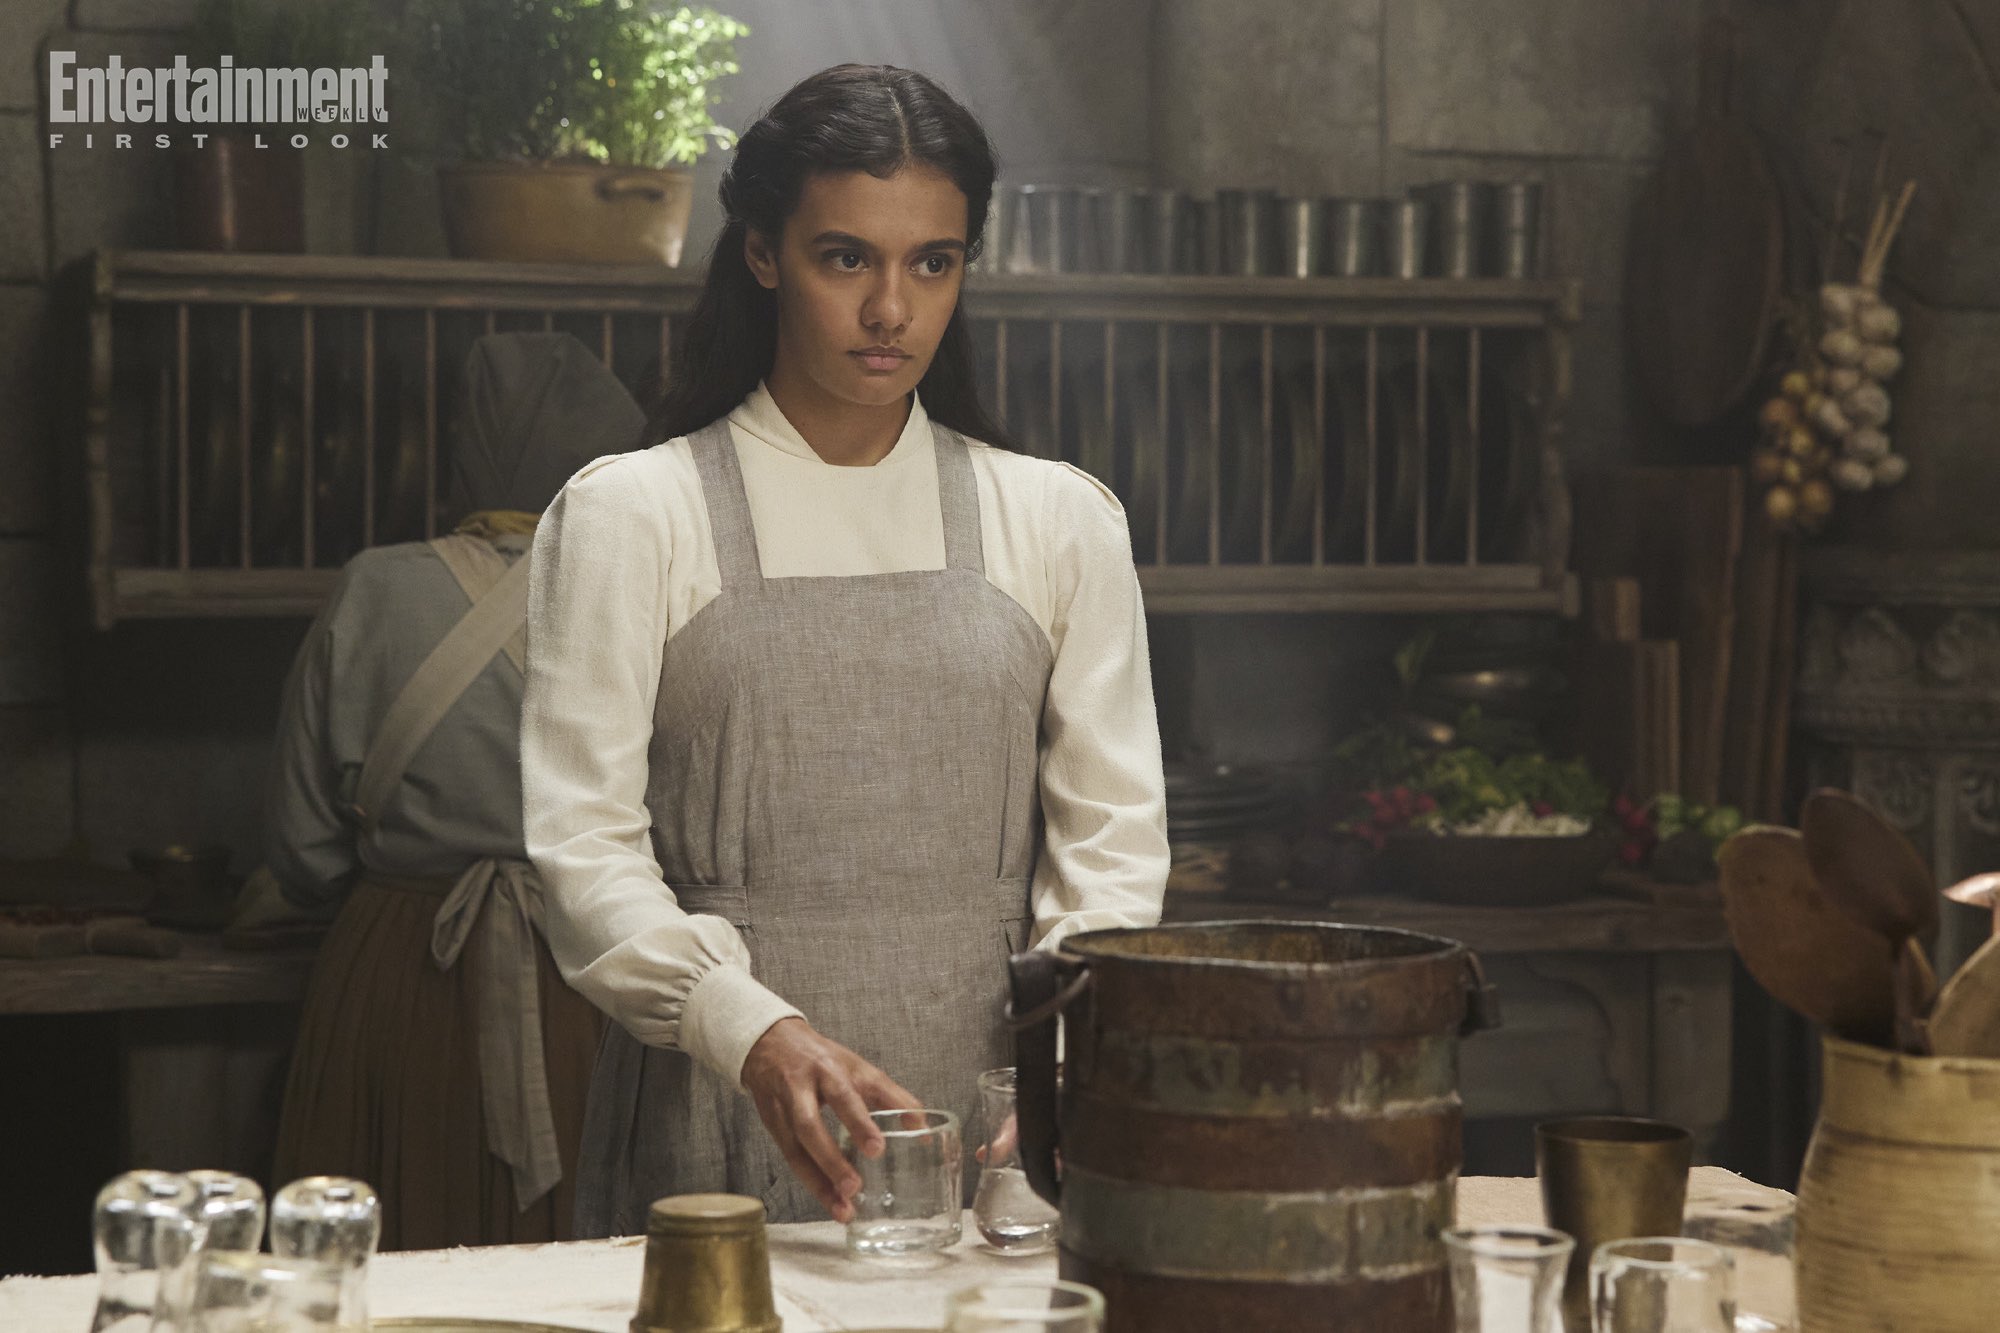 Egwene setting a table in the White Tower, dressed in novice white and a gray apron while Laras (?) cooks in the background